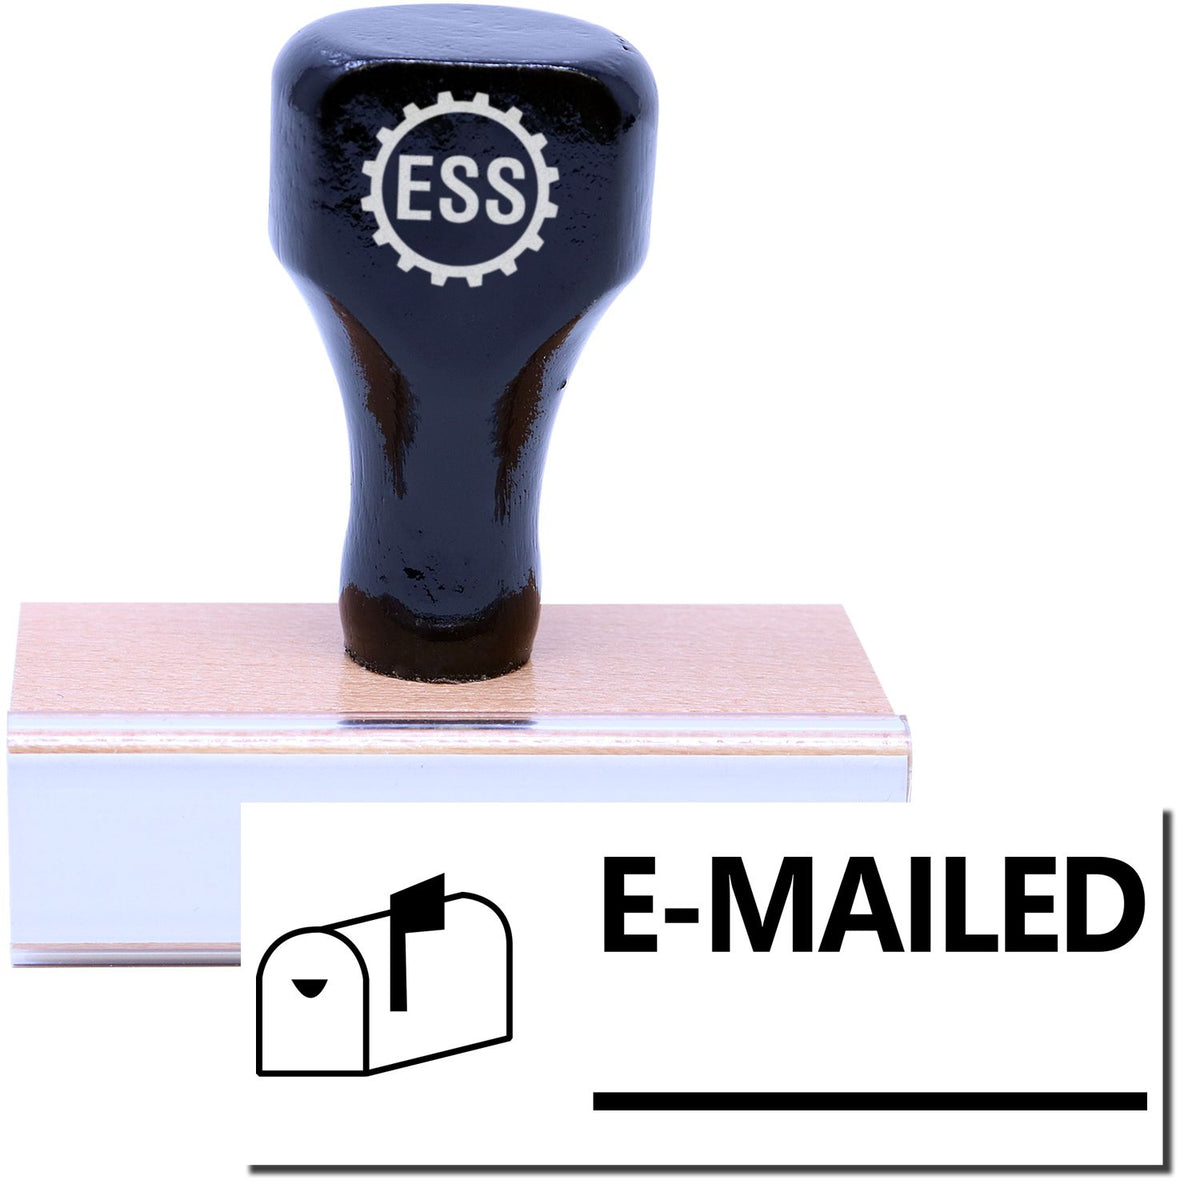 A stock office rubber stamp with a stamped image showing how the text &quot;E-MAILED&quot; in a large font with a line below the text and an image of a mailbox with the flag up on the left side is displayed after stamping.